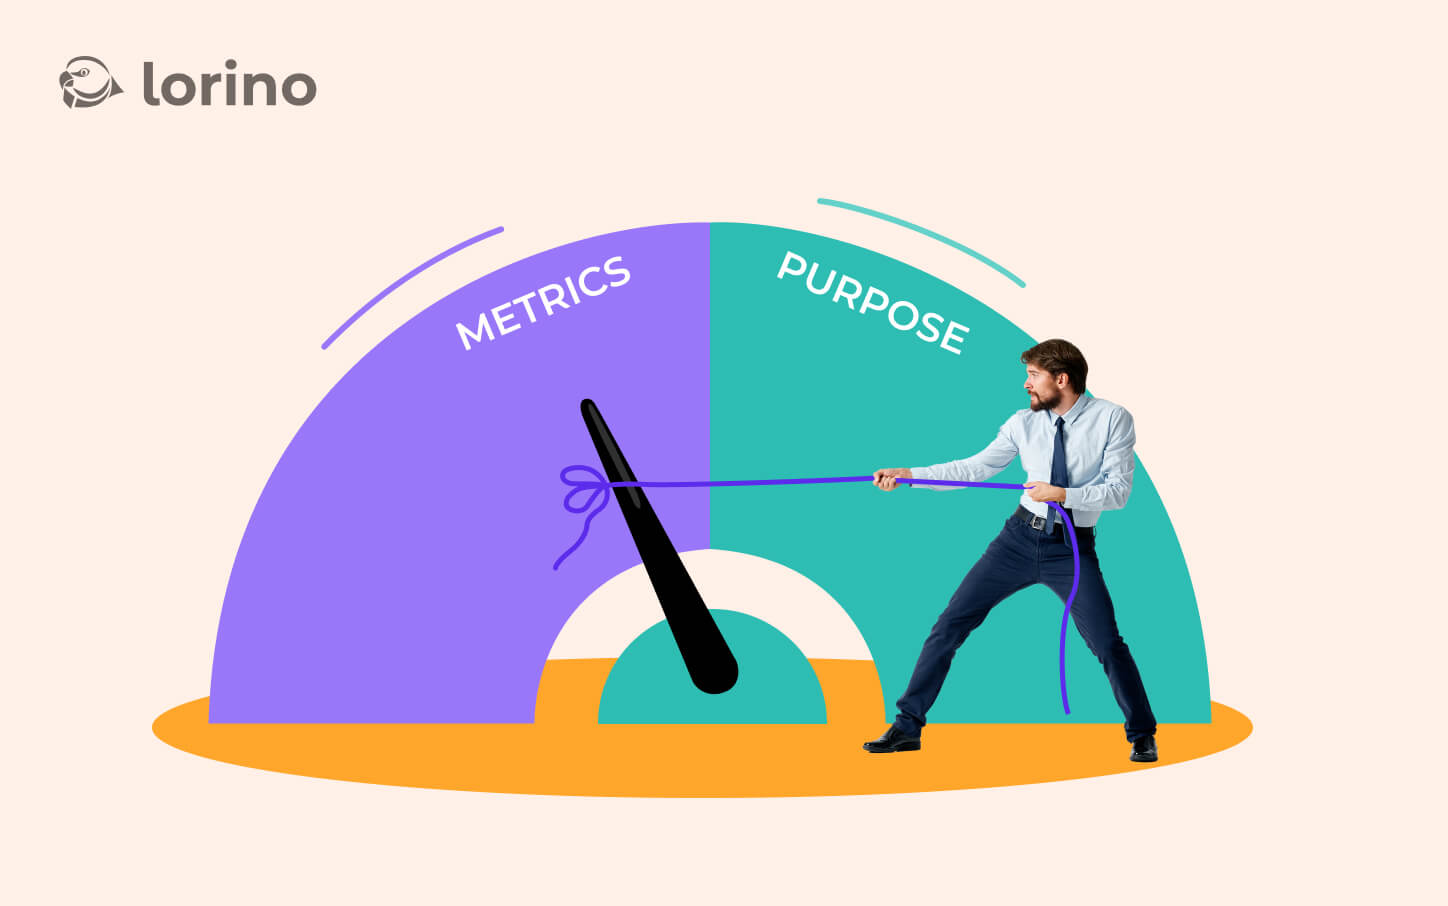 prioritizing meaning and purpose over metrics in company culture - Lorino